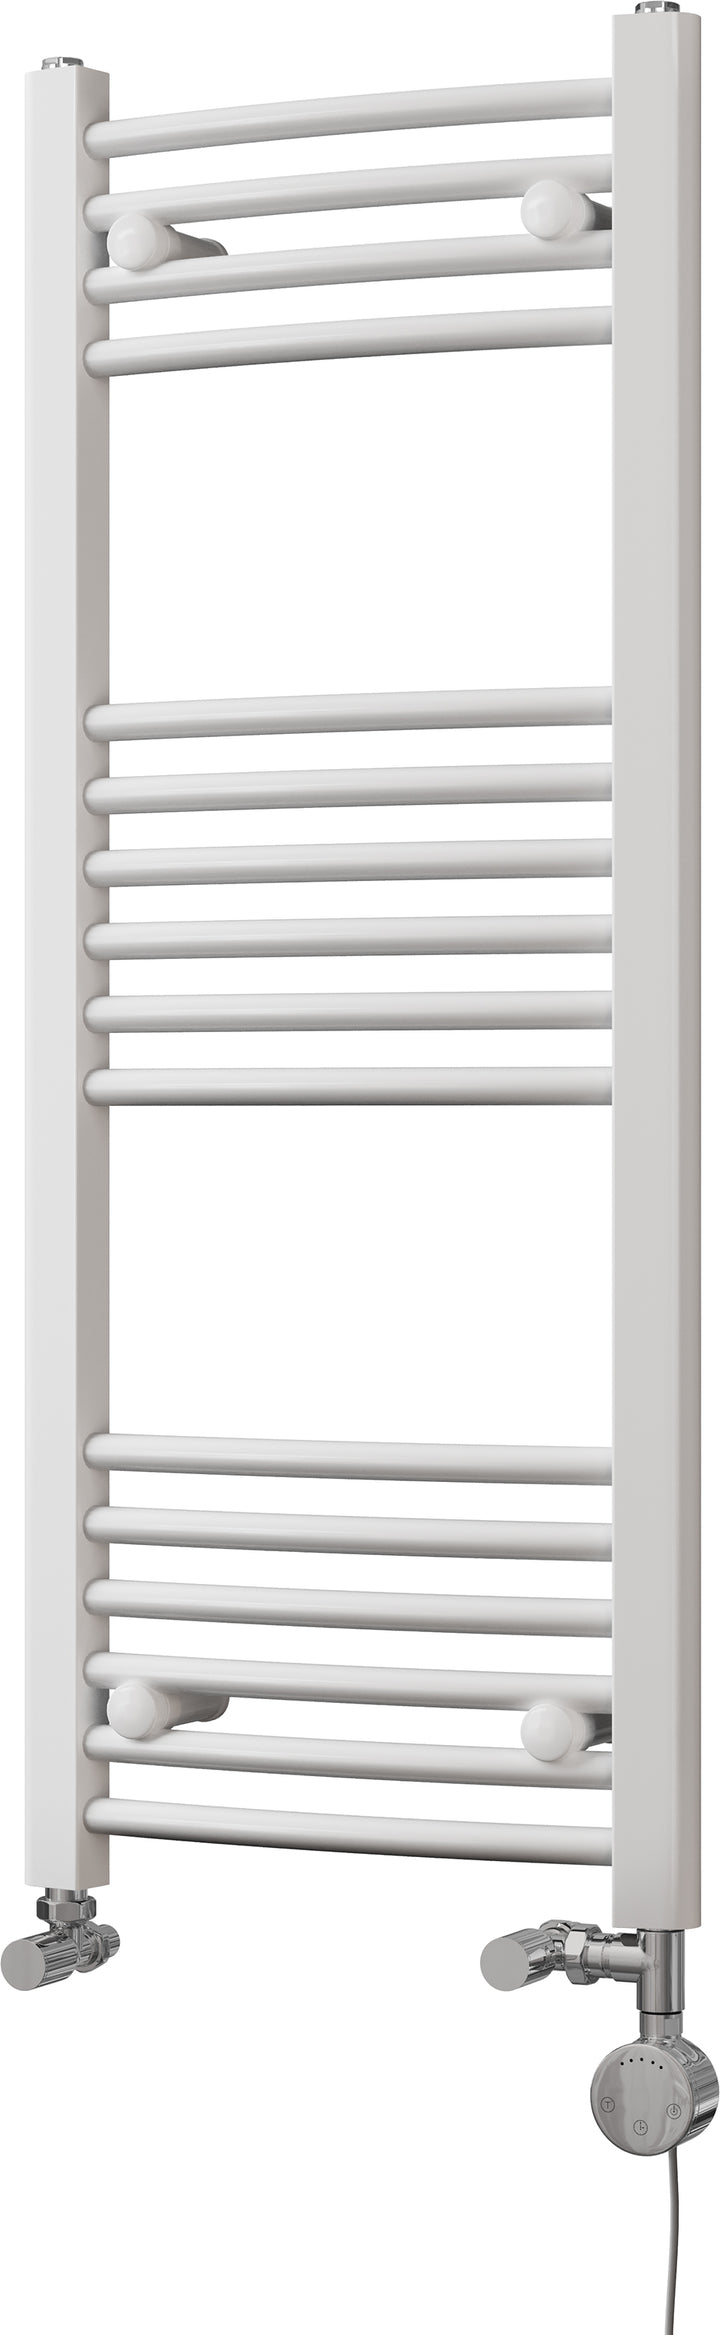 Zennor - White Dual Fuel Towel Rail H1000mm x W400mm Thermostatic - Curved